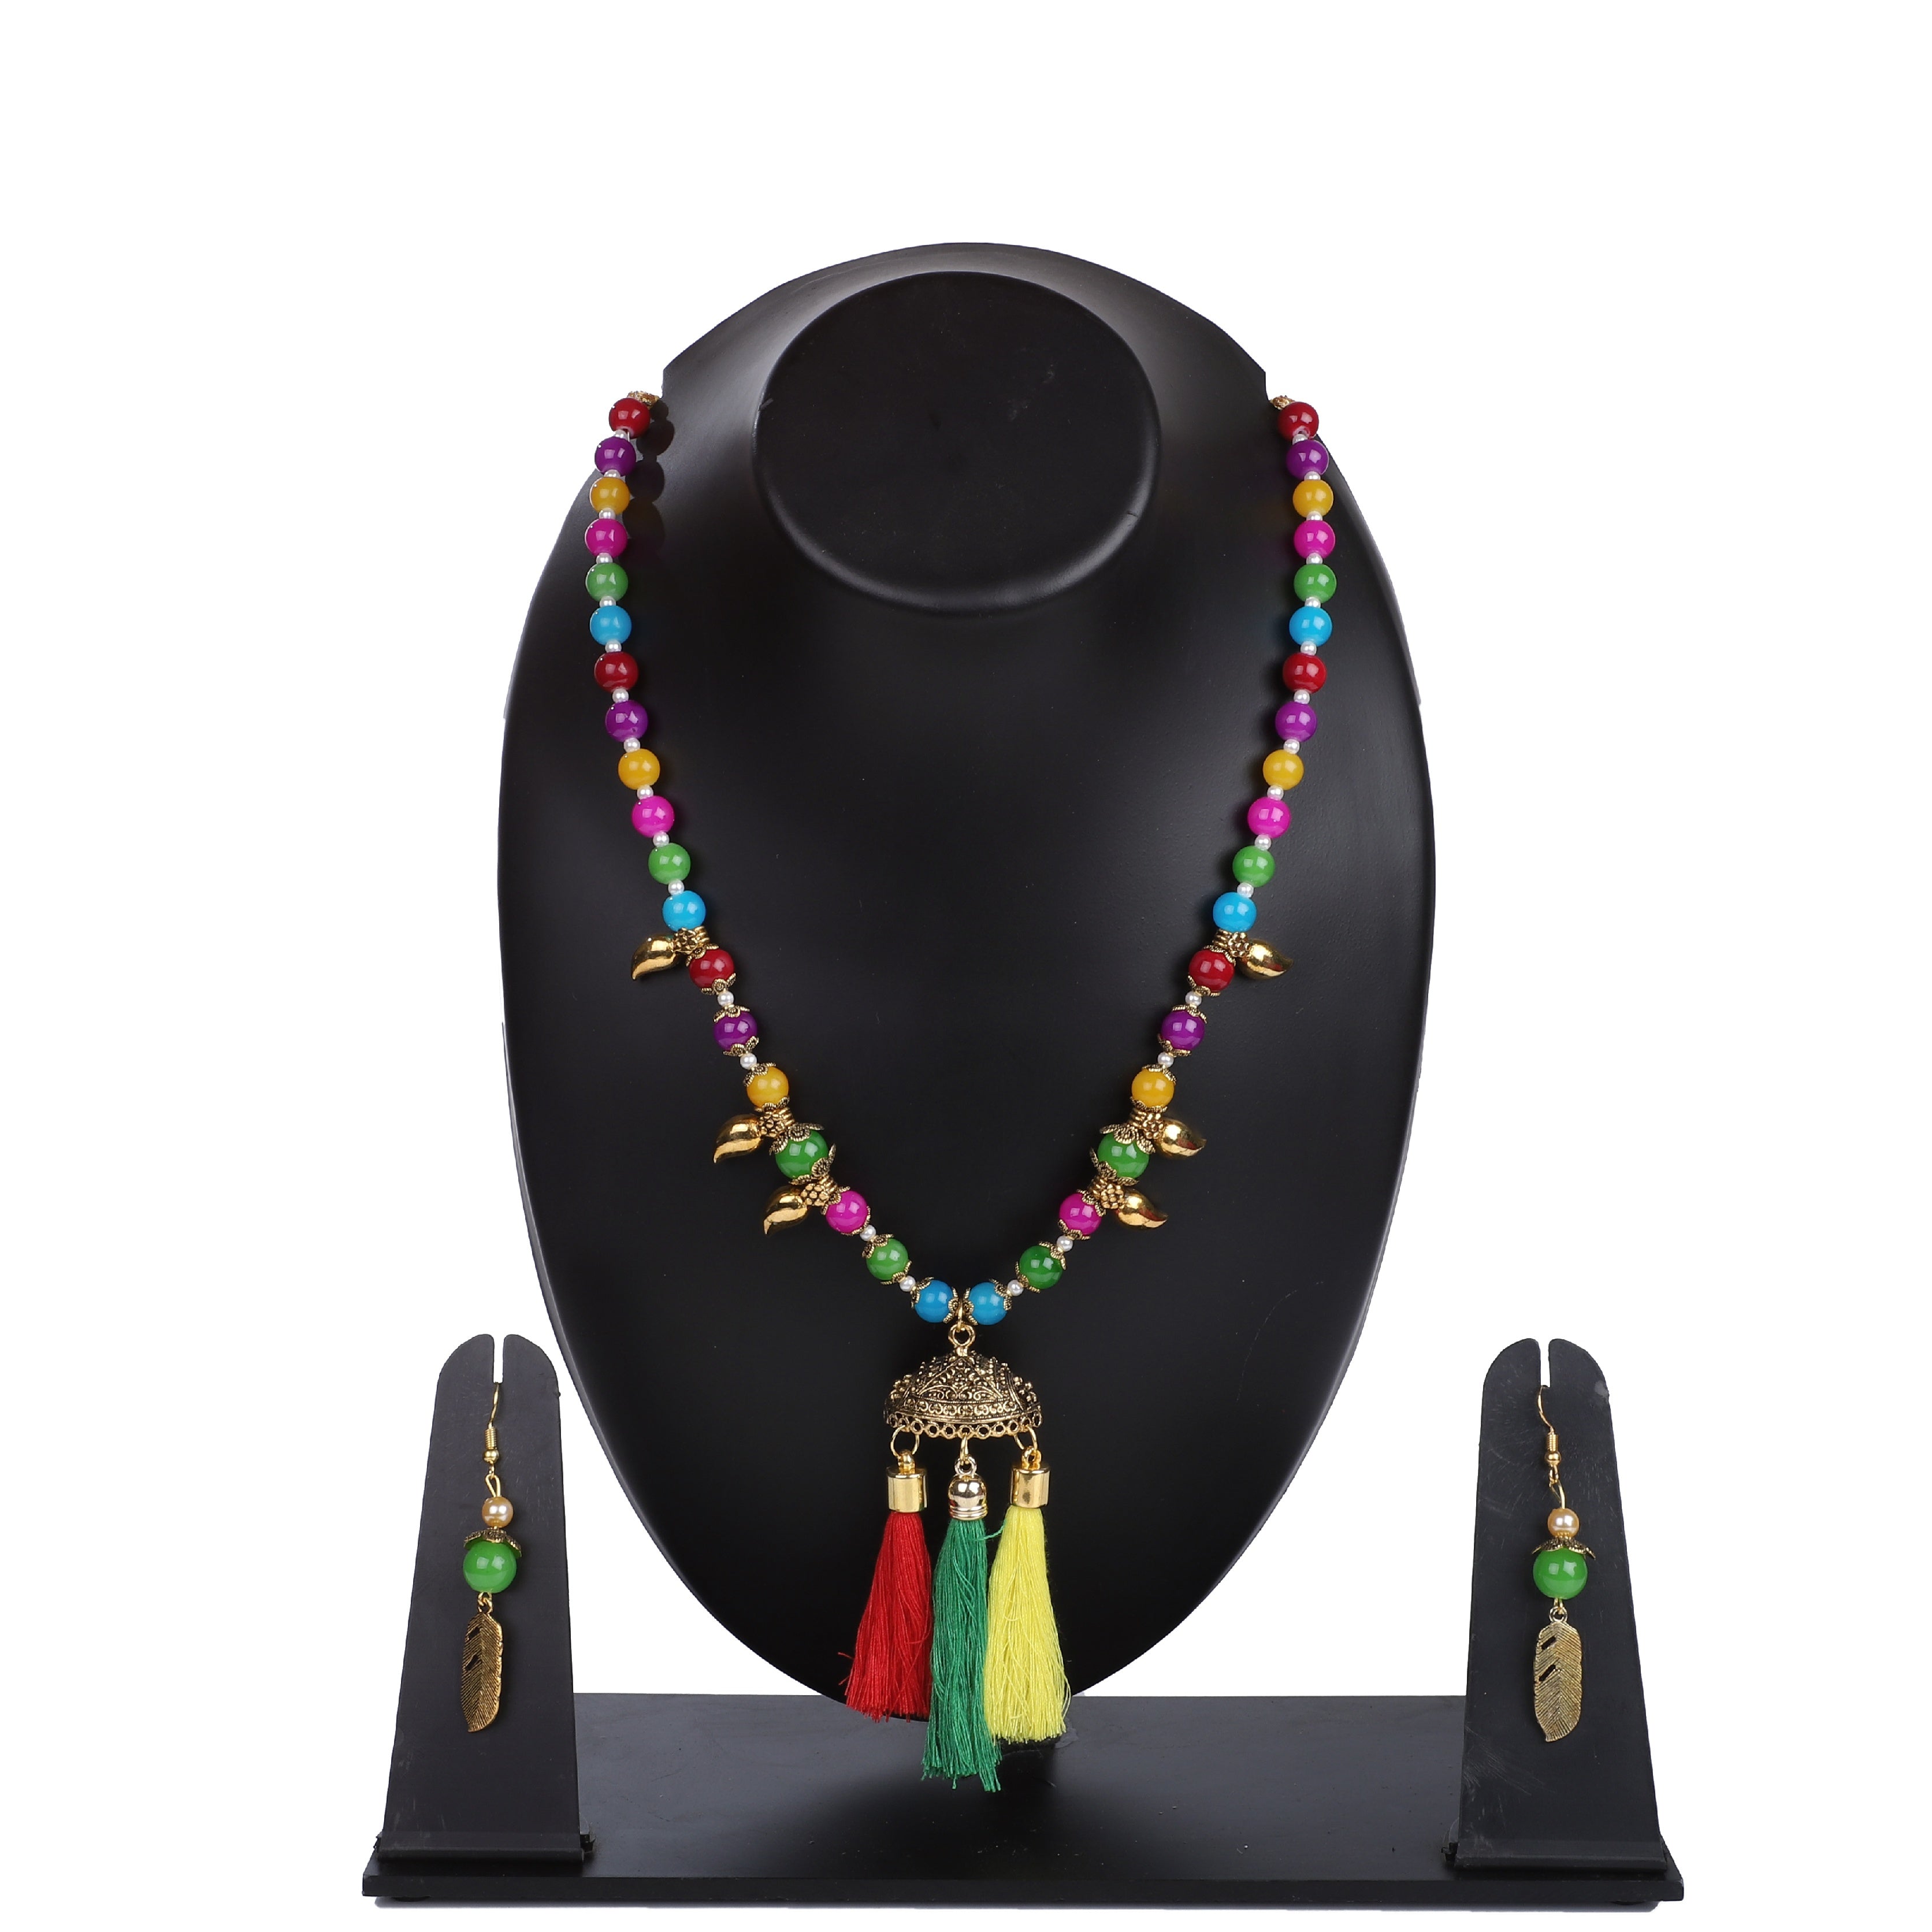 Indian Jewellery from Meira Jewellery:,Meira jewellery necklace with tassel and multi color beads